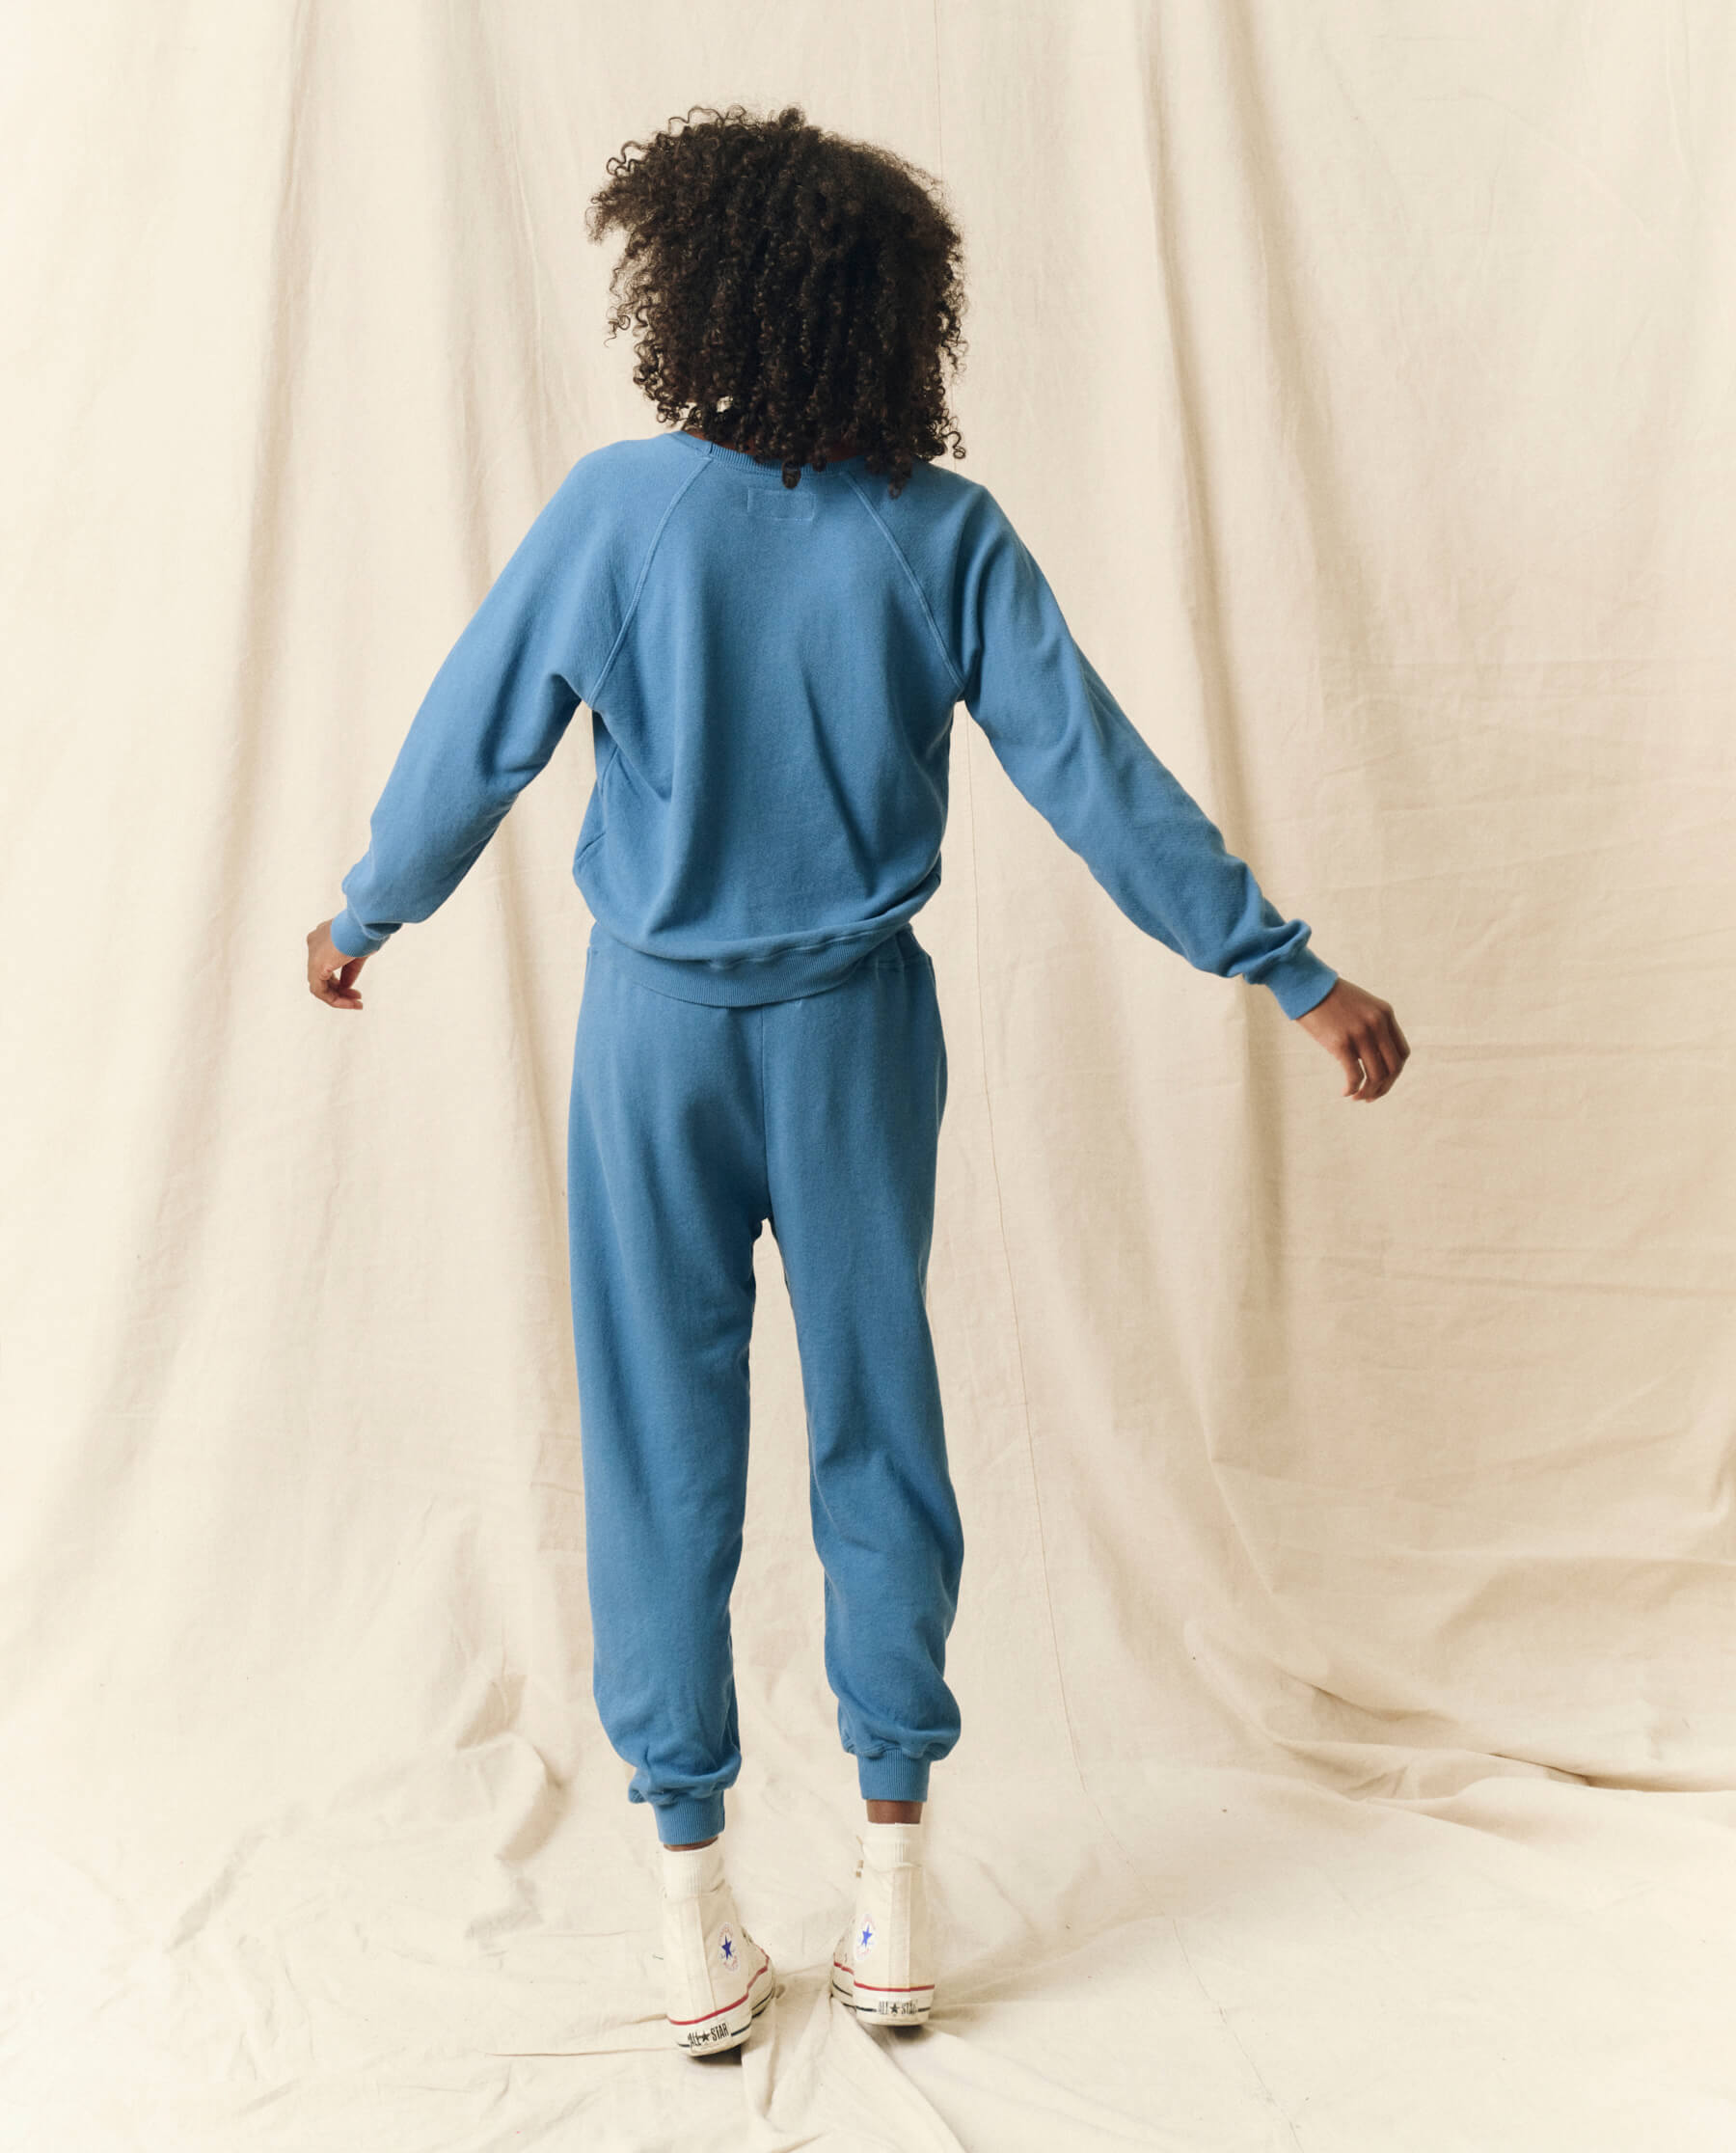 The Cropped Sweatpant. Solid -- Glacier Blue